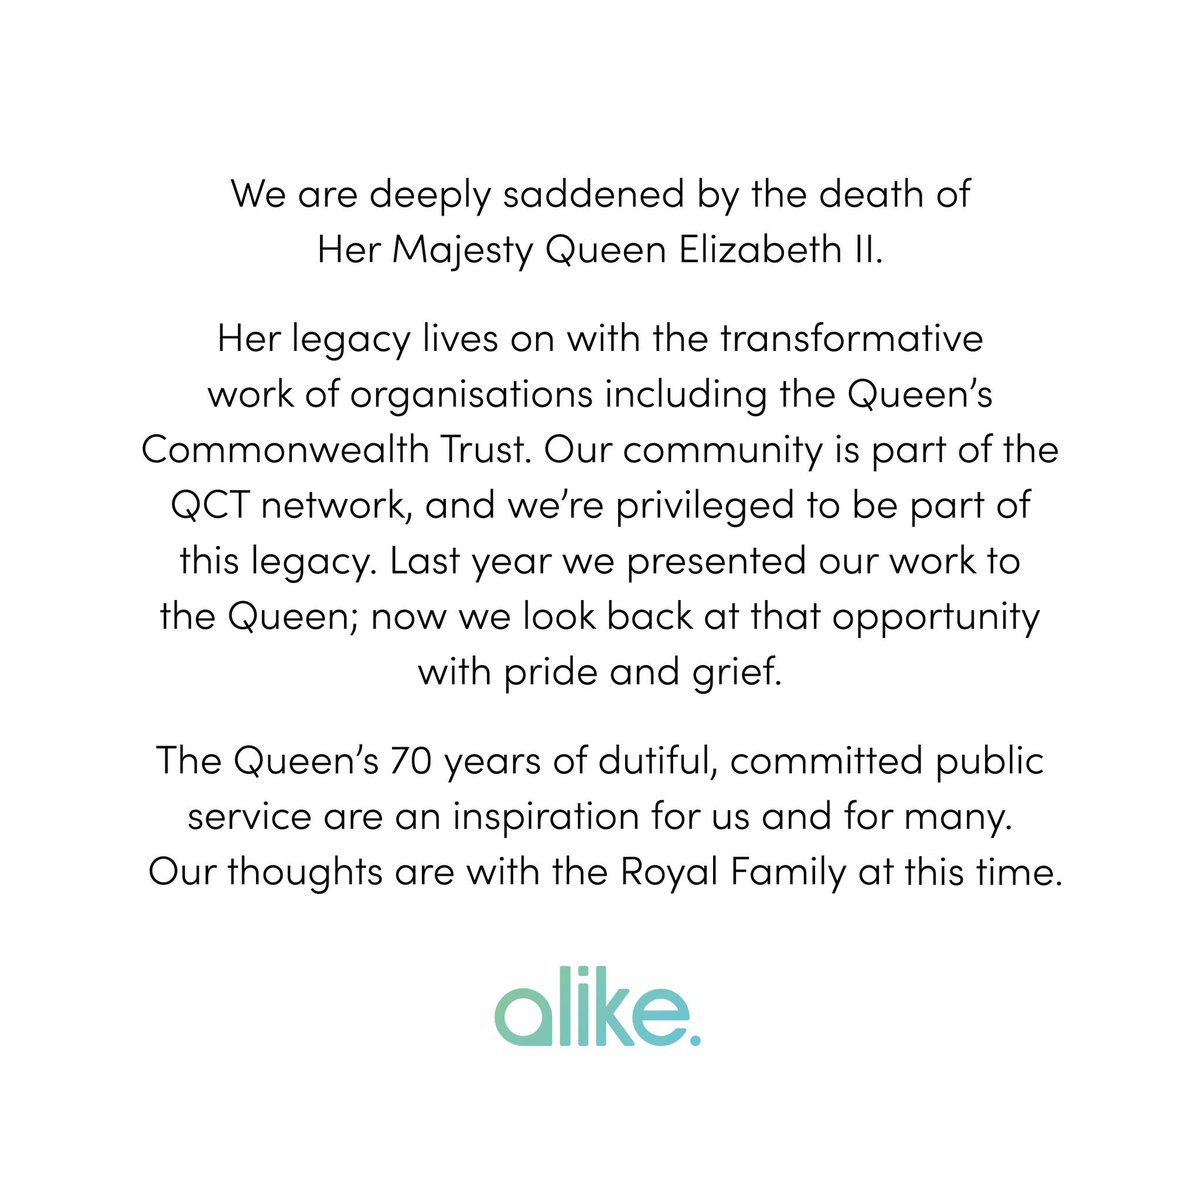 A tribute to Her Majesty Queen Elizabeth II, from Team Alike. In memory of the UK's longest reigning monarch. A leader and an icon.